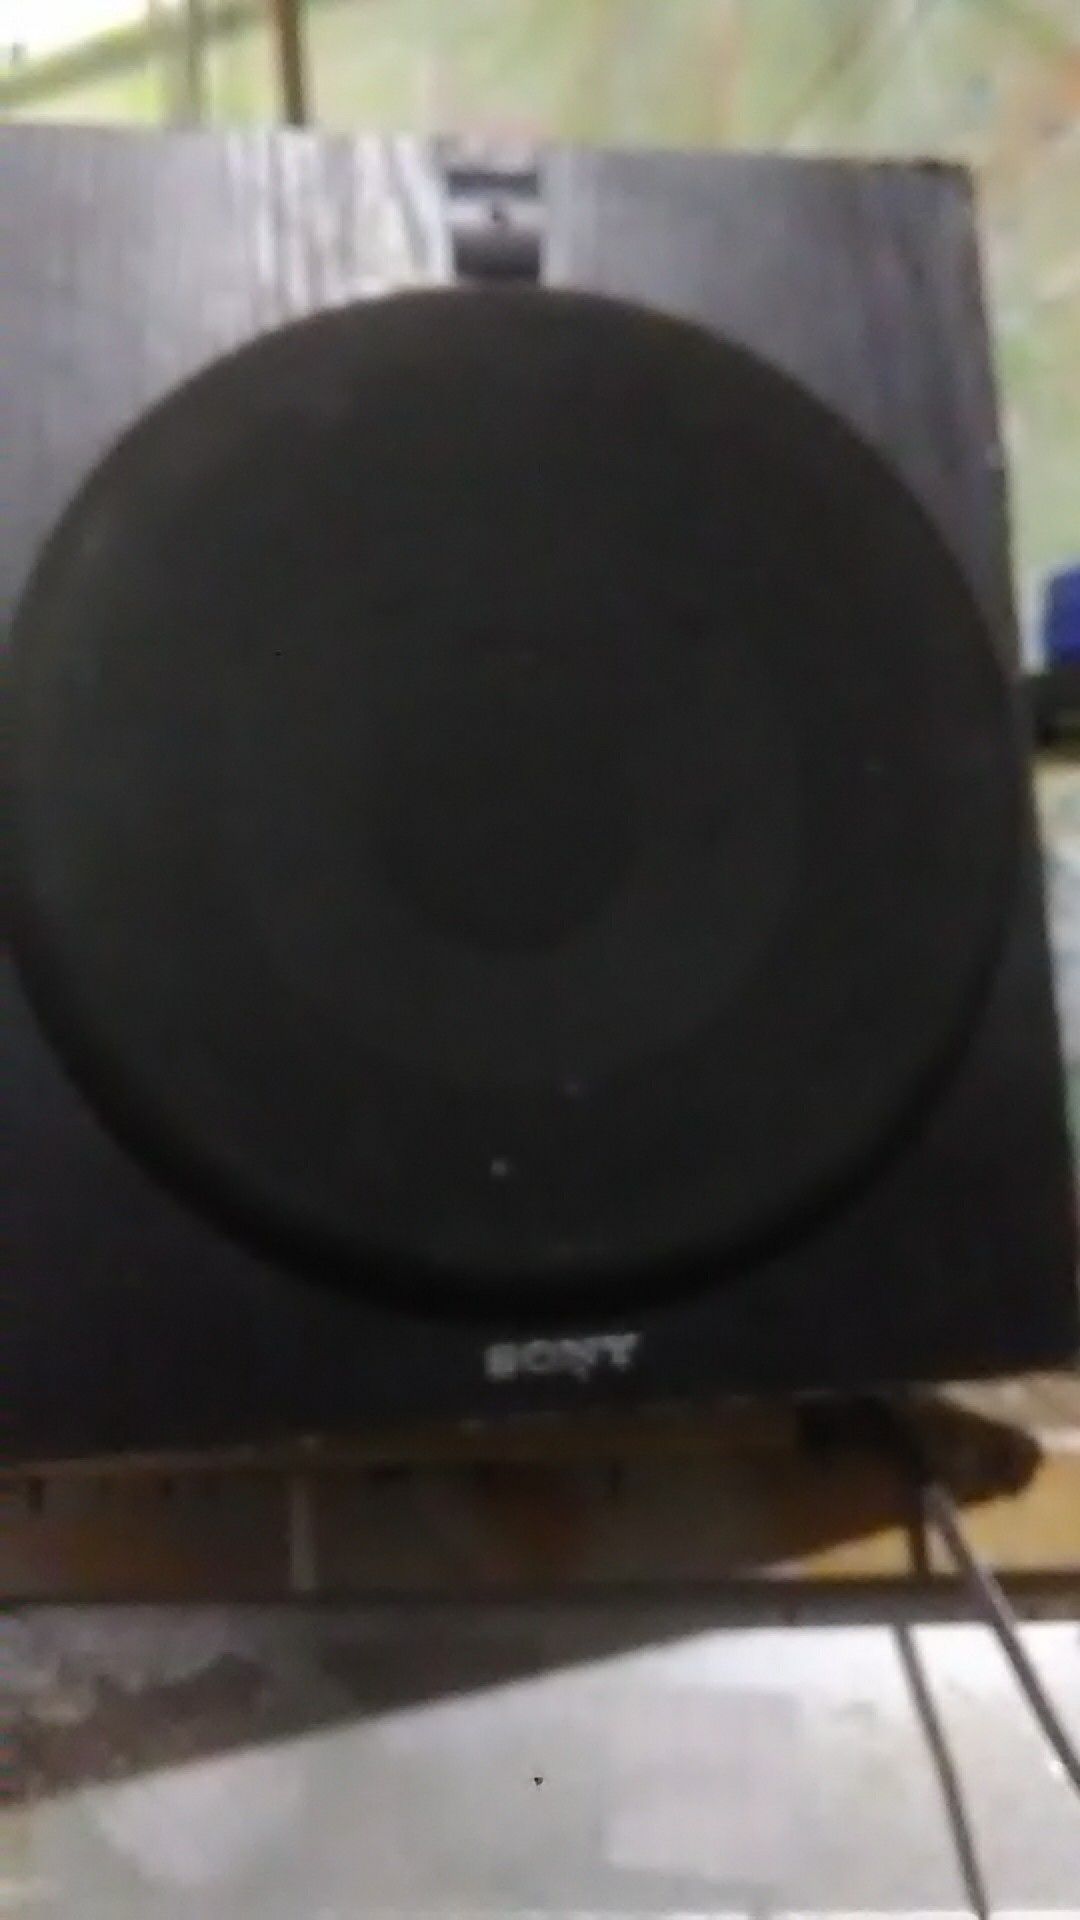 Sony active subwoofer